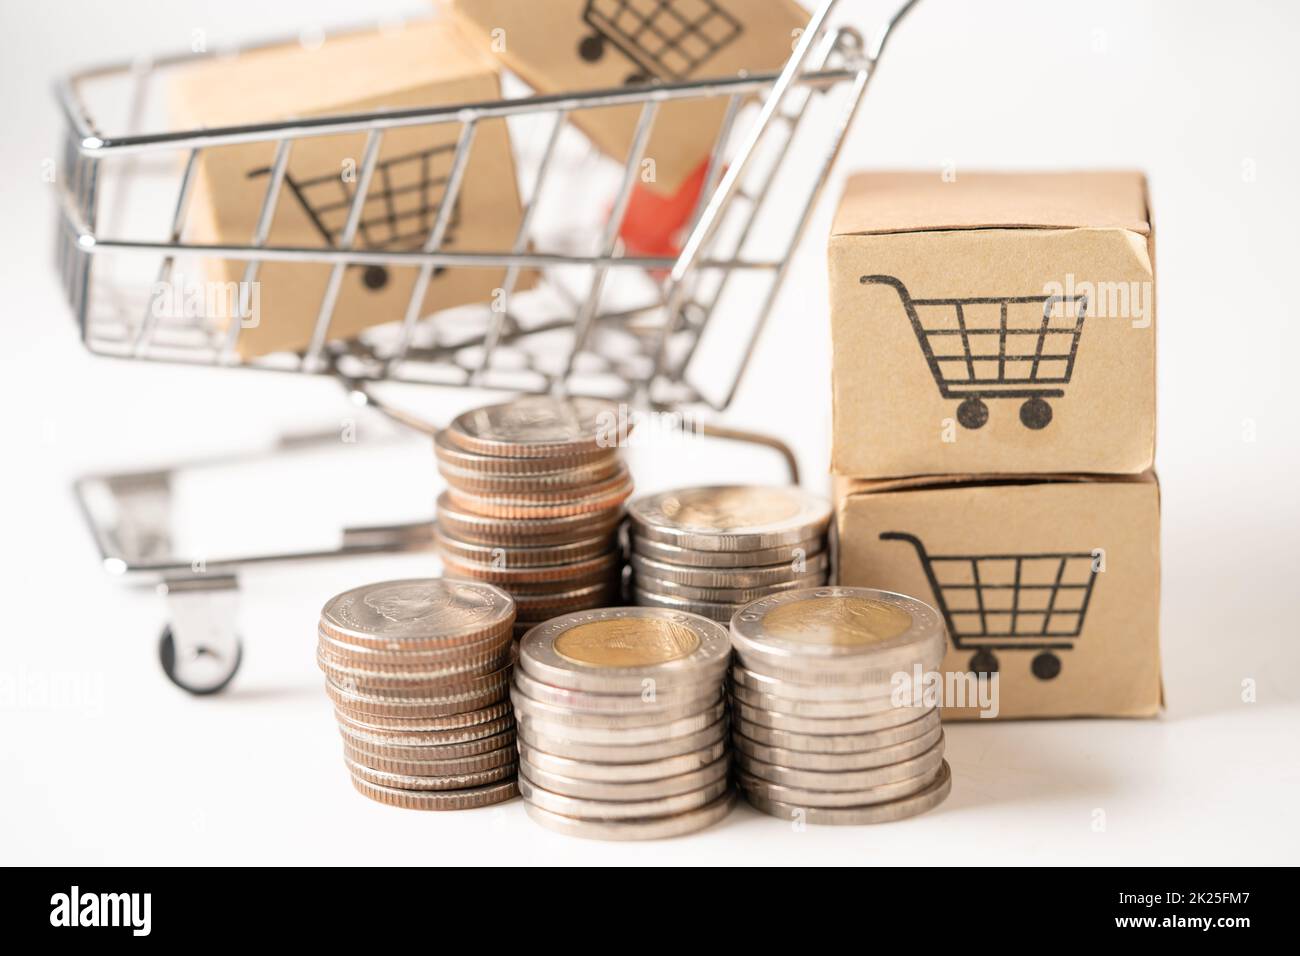 Shopping cart logo on box with coins. Banking Account, Investment Analytic research data economy, trading, Business import export online company concept. Stock Photo